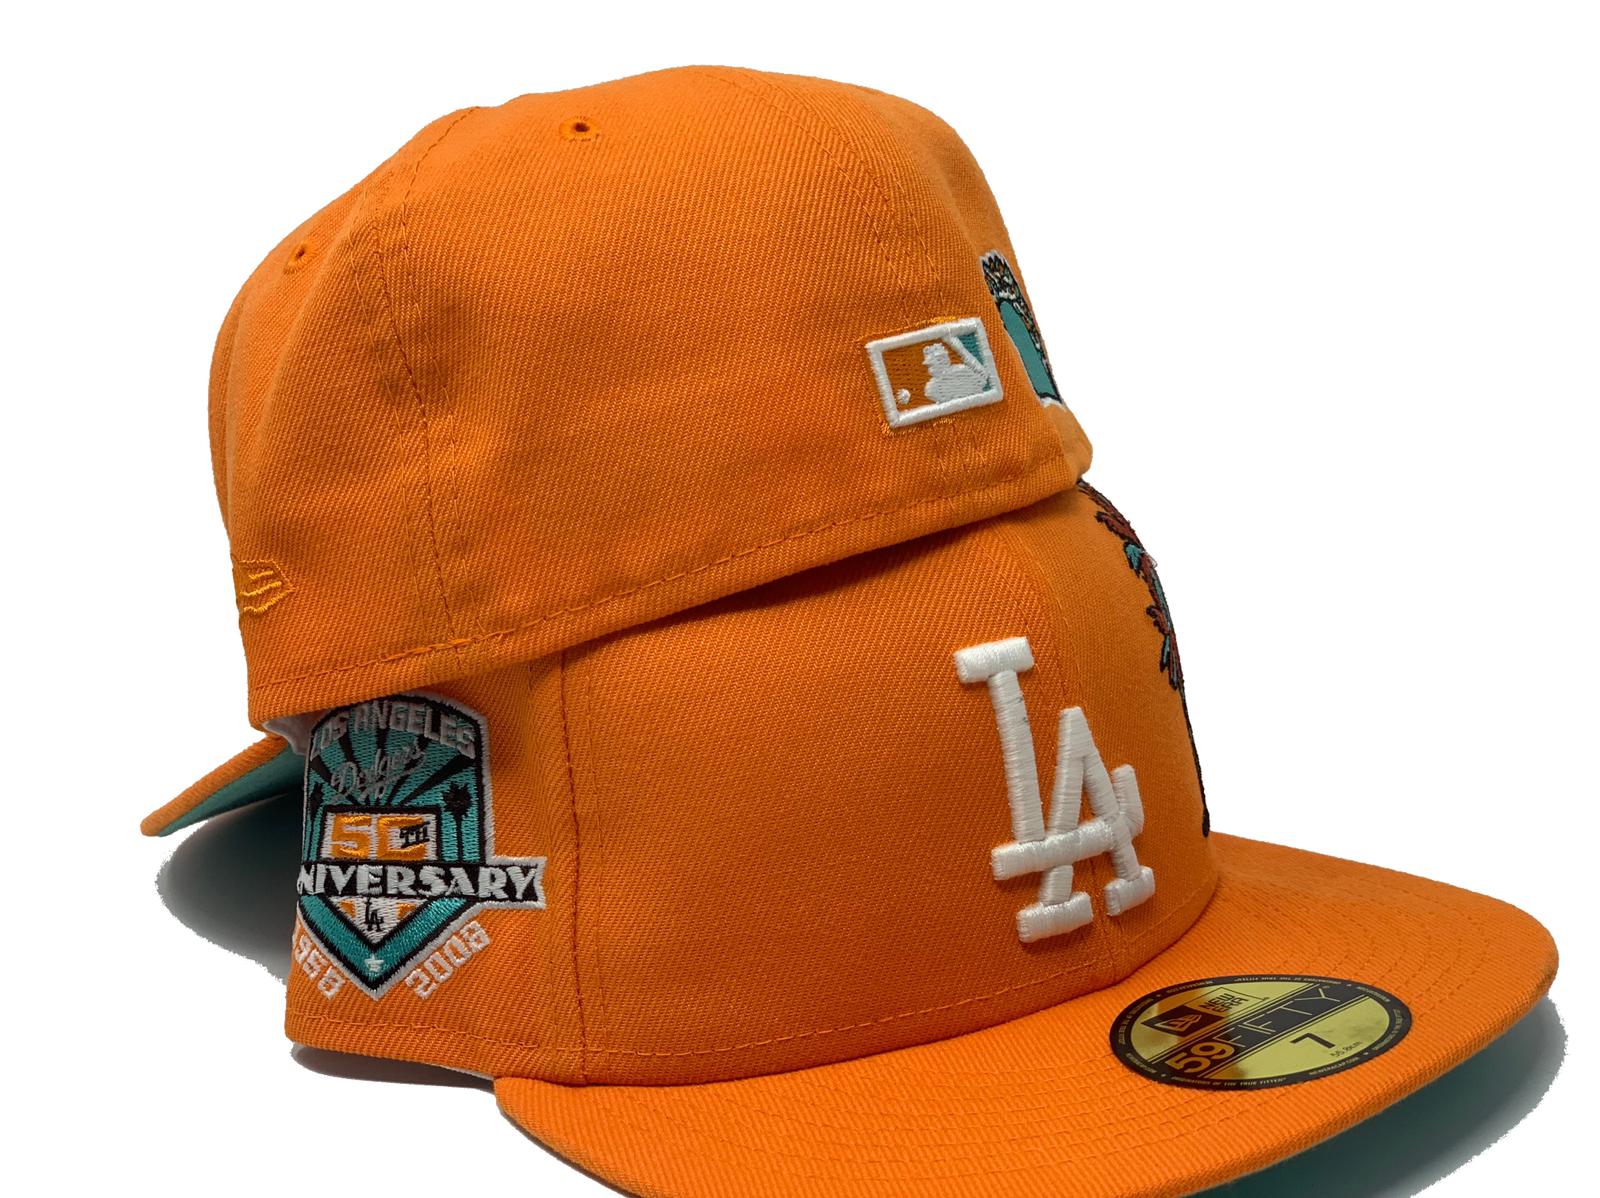 Los Angeles Dodgers 40th Anniversary Fitted Hat Orange 7 1/4 3/8 1/2 5/8